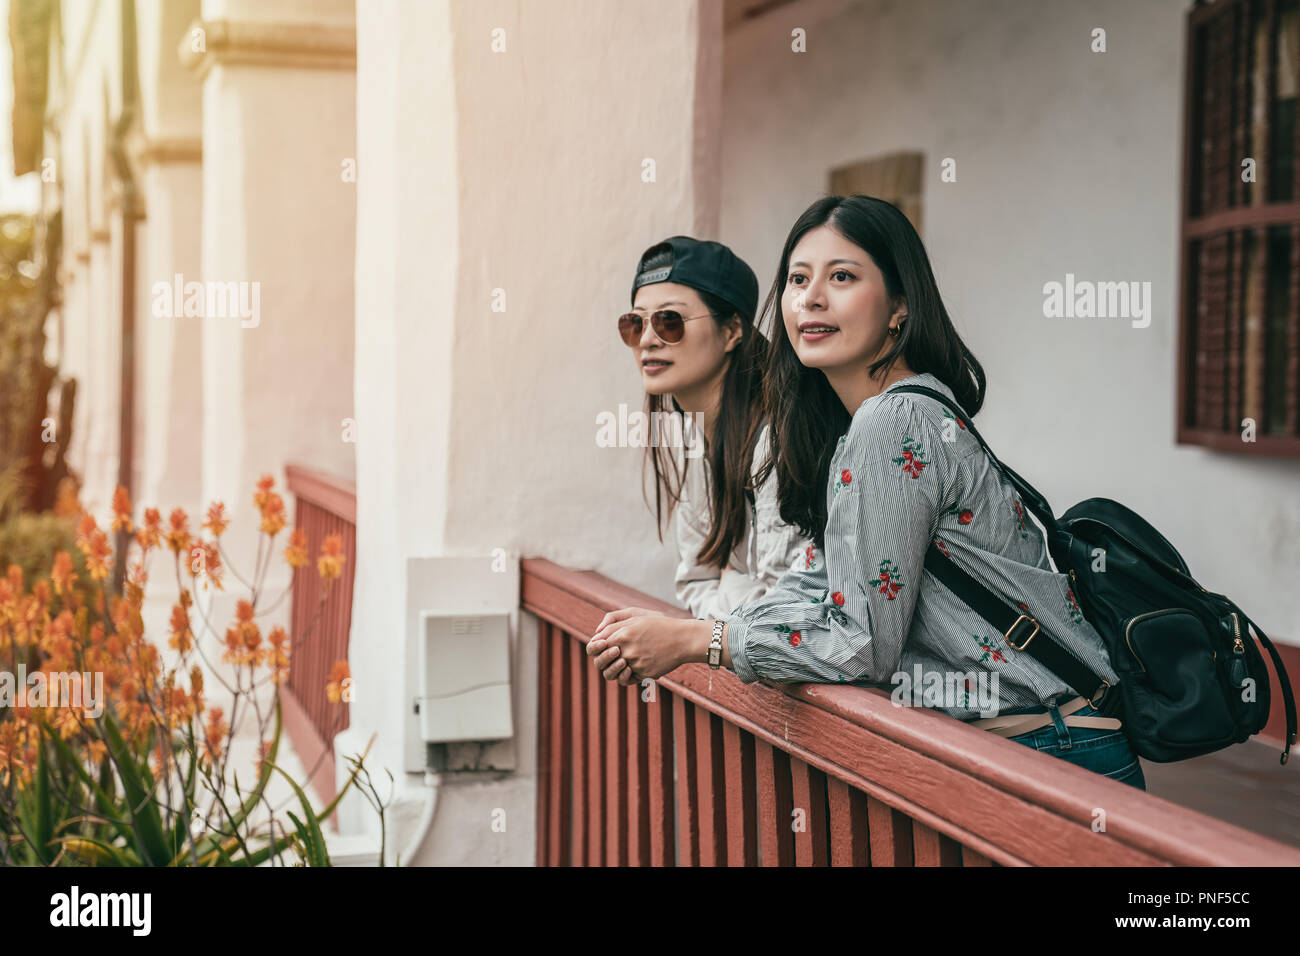 beautiful young sisters leaning on the guardrail for a break in an old famous sightseeing building. Stock Photo